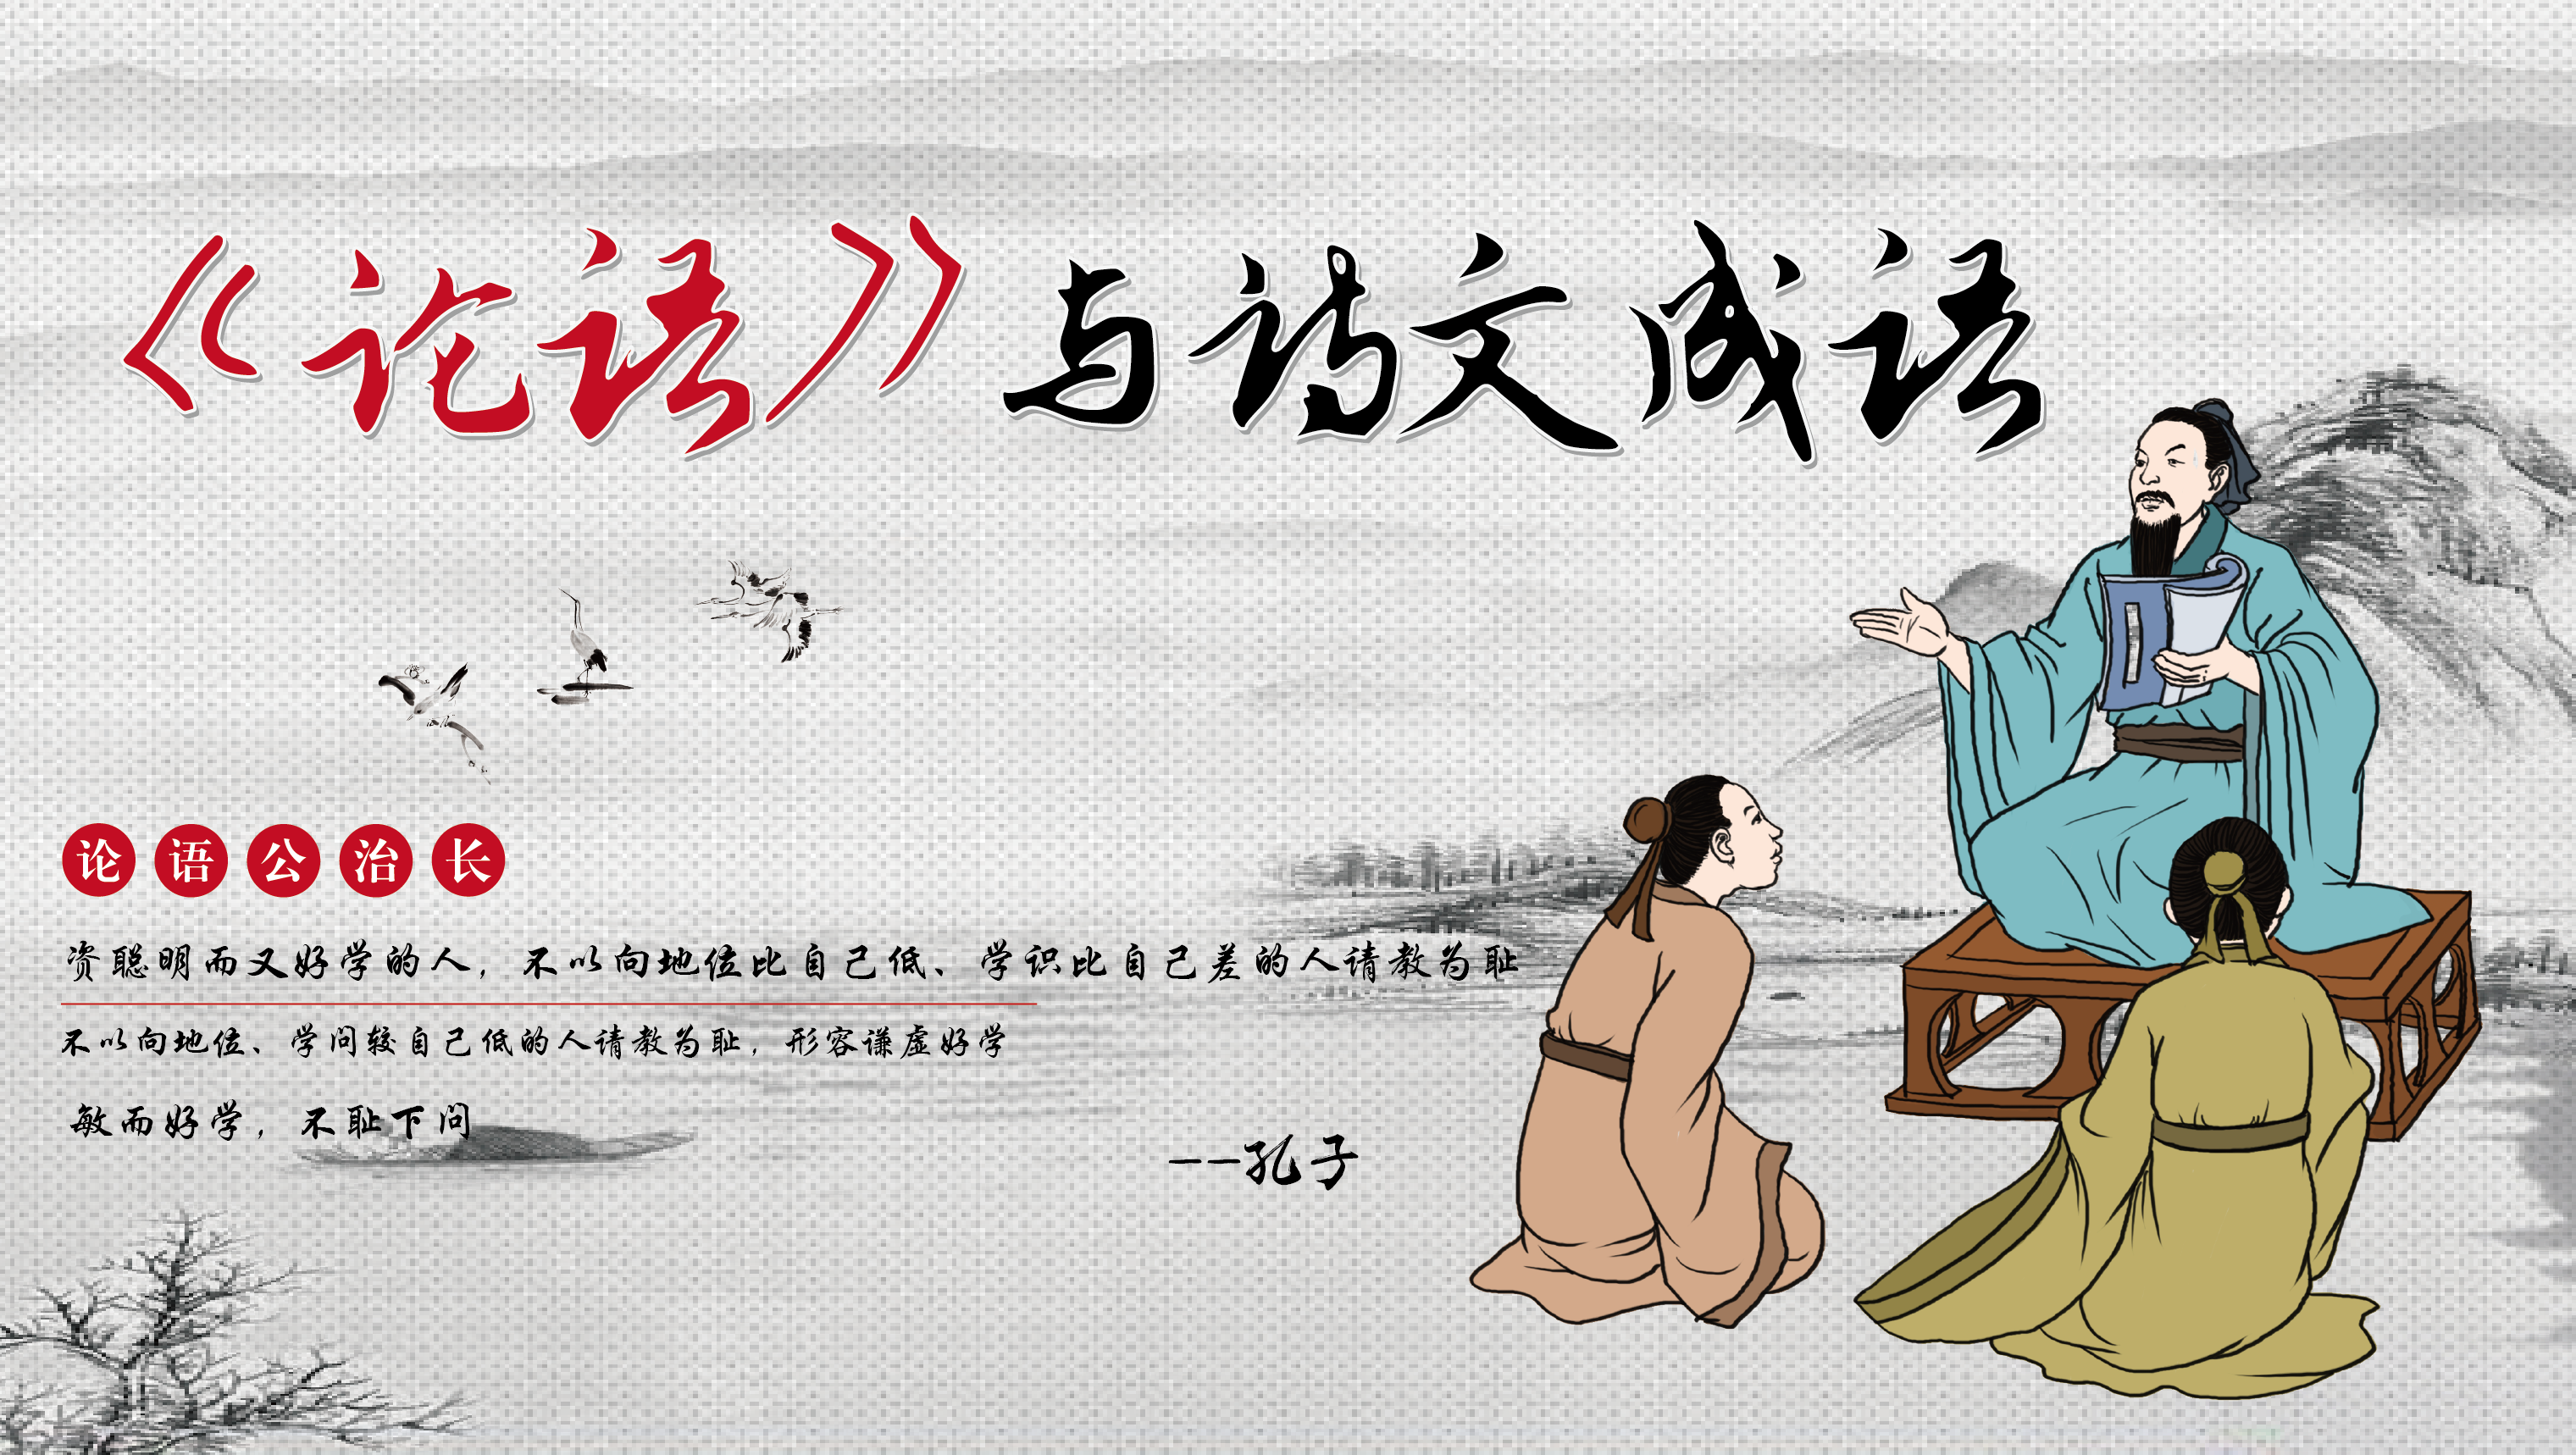 Lecture 9: The Analects of Confucius and poetic idioms